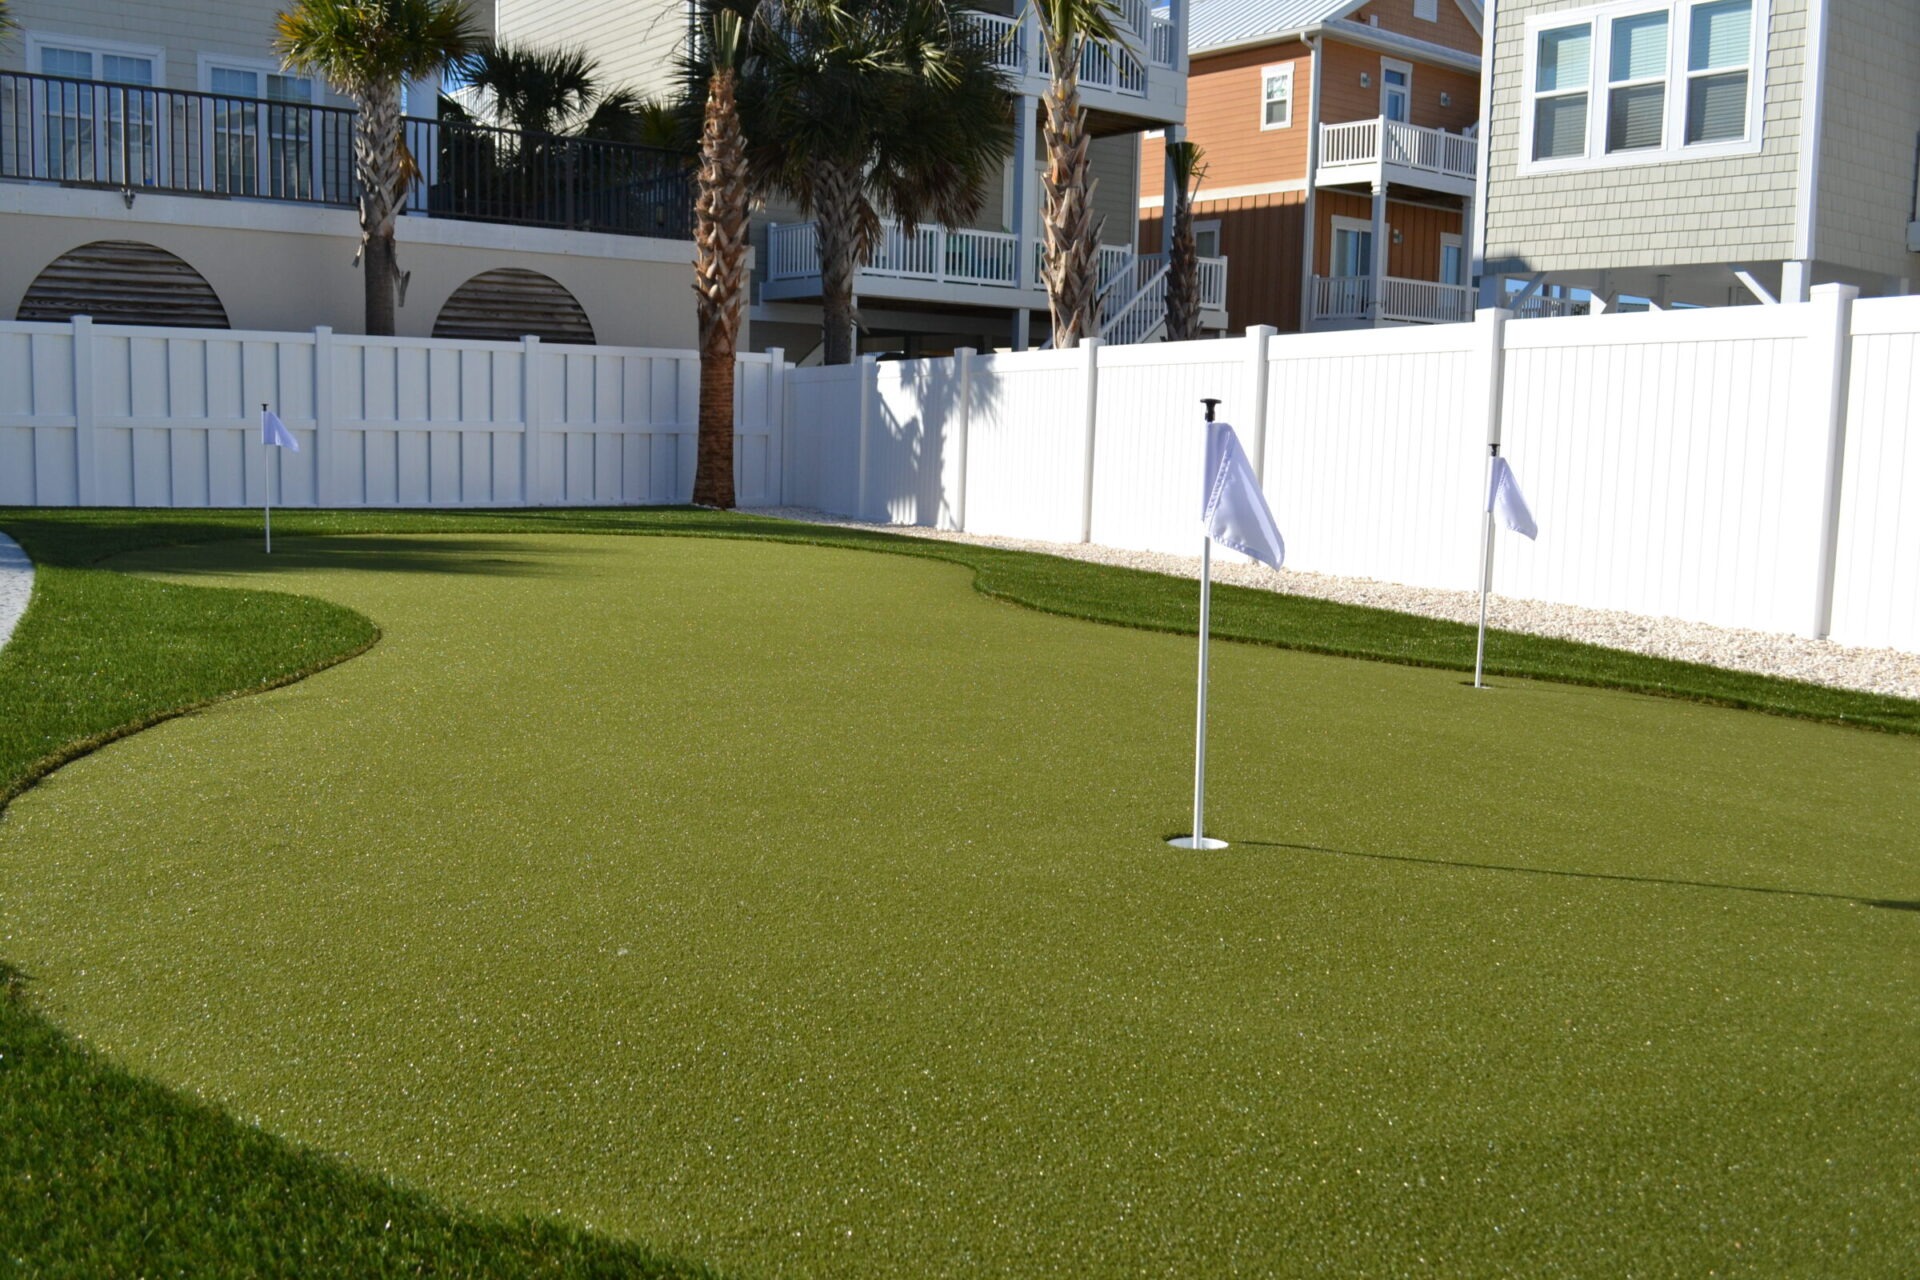 A backyard putting green with two holes and flags, surrounded by a white fence, palm trees, and residential buildings under a clear sky.